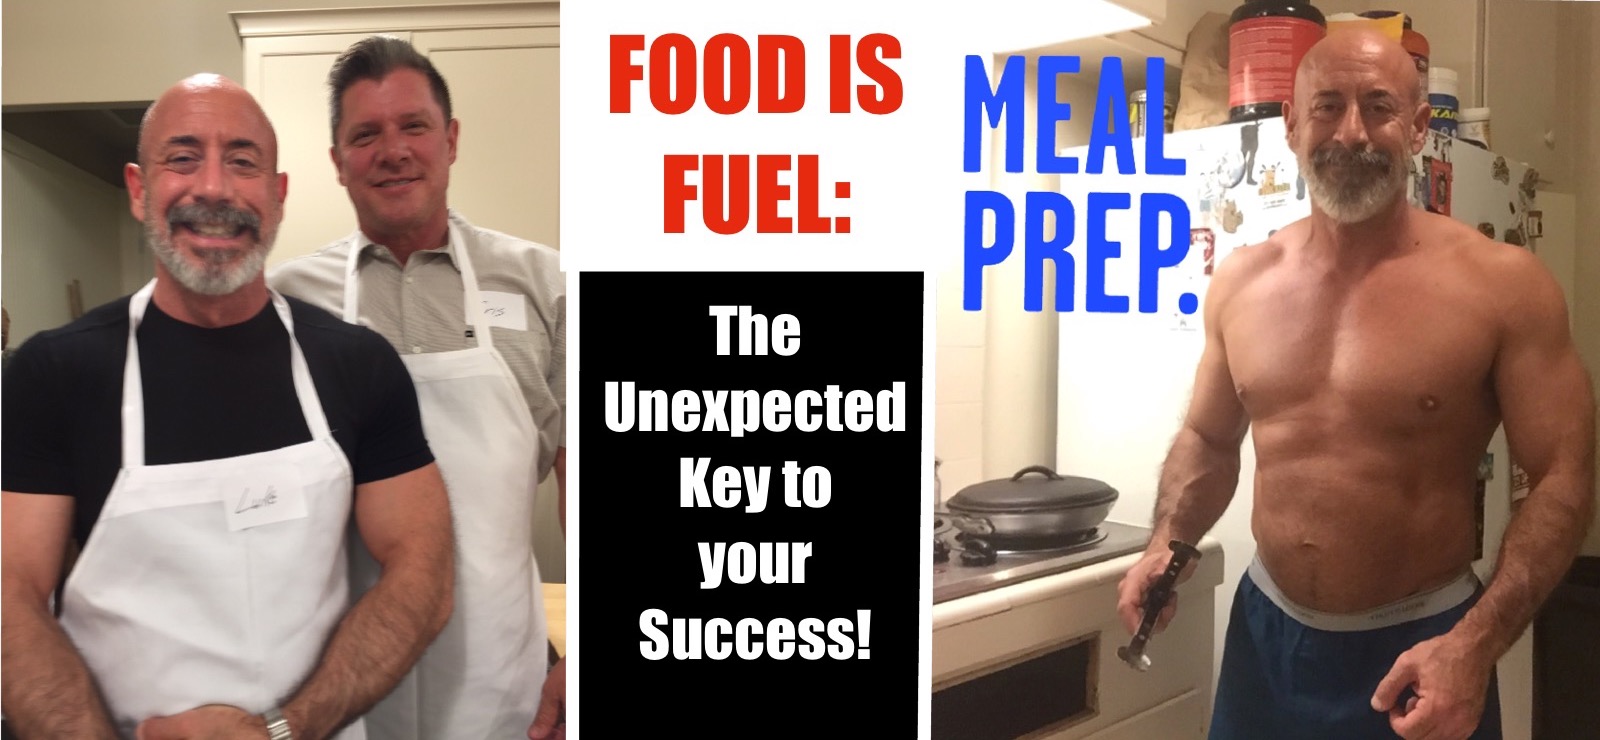 FOOD IS FUEL: the Unexpected Key to Your Success!